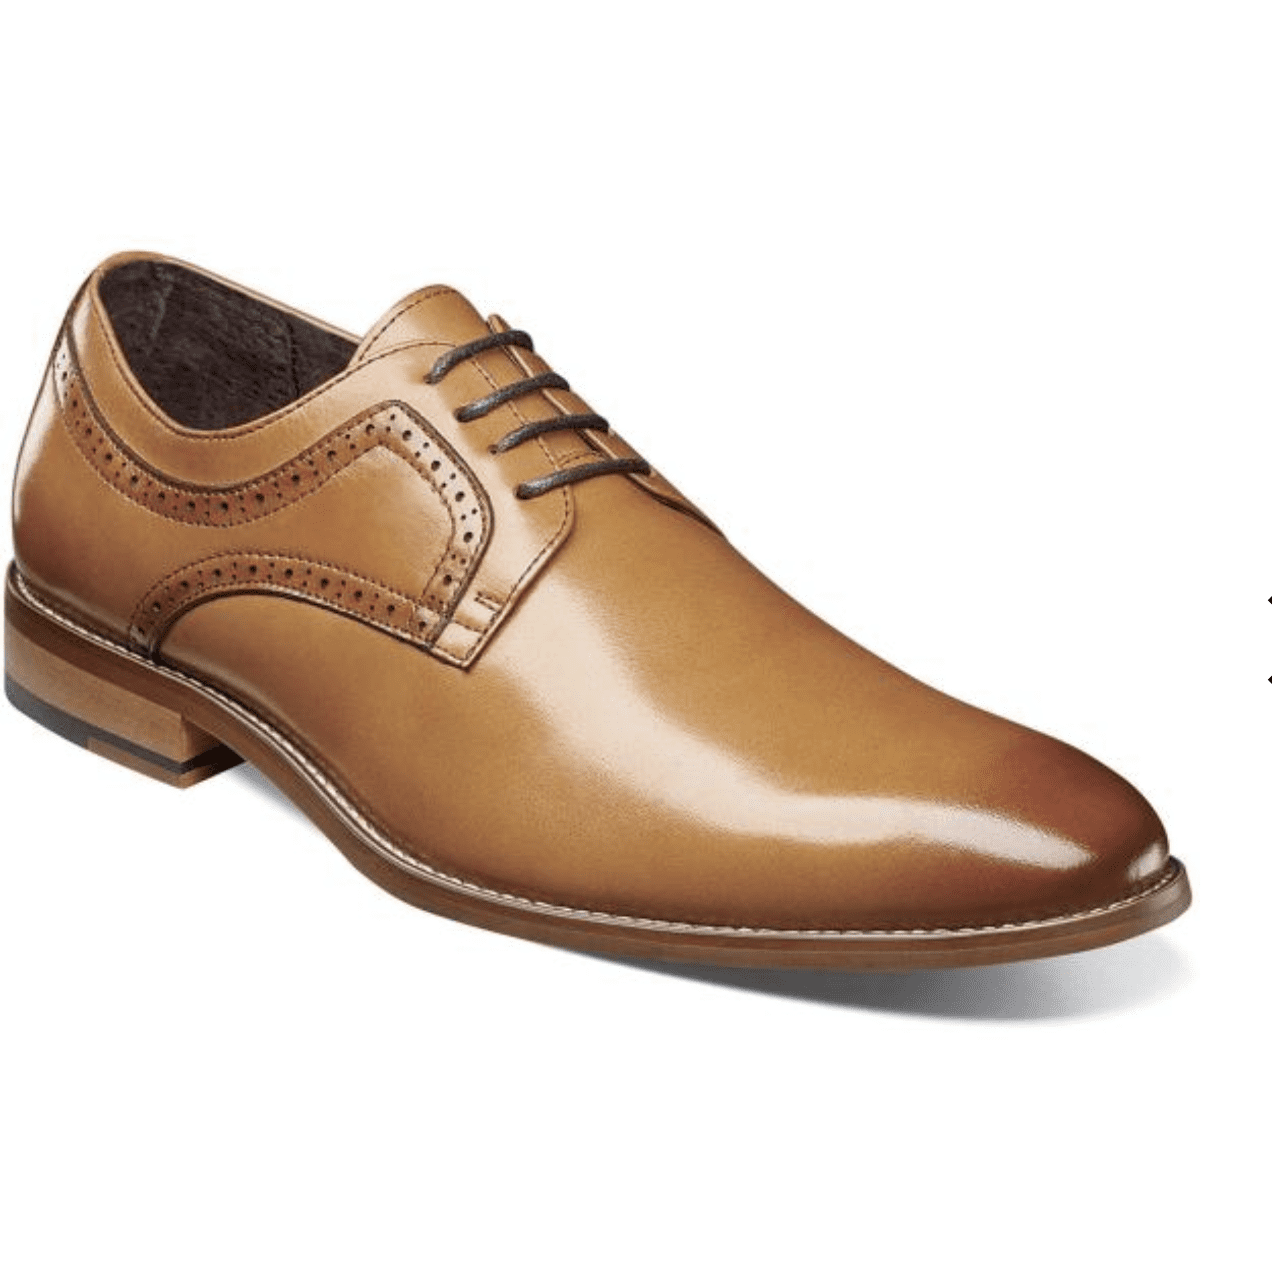 Stacy Adams - Stacy Adams Dickens Plain Toe Oxford Shoes Tan 25231-240 ...